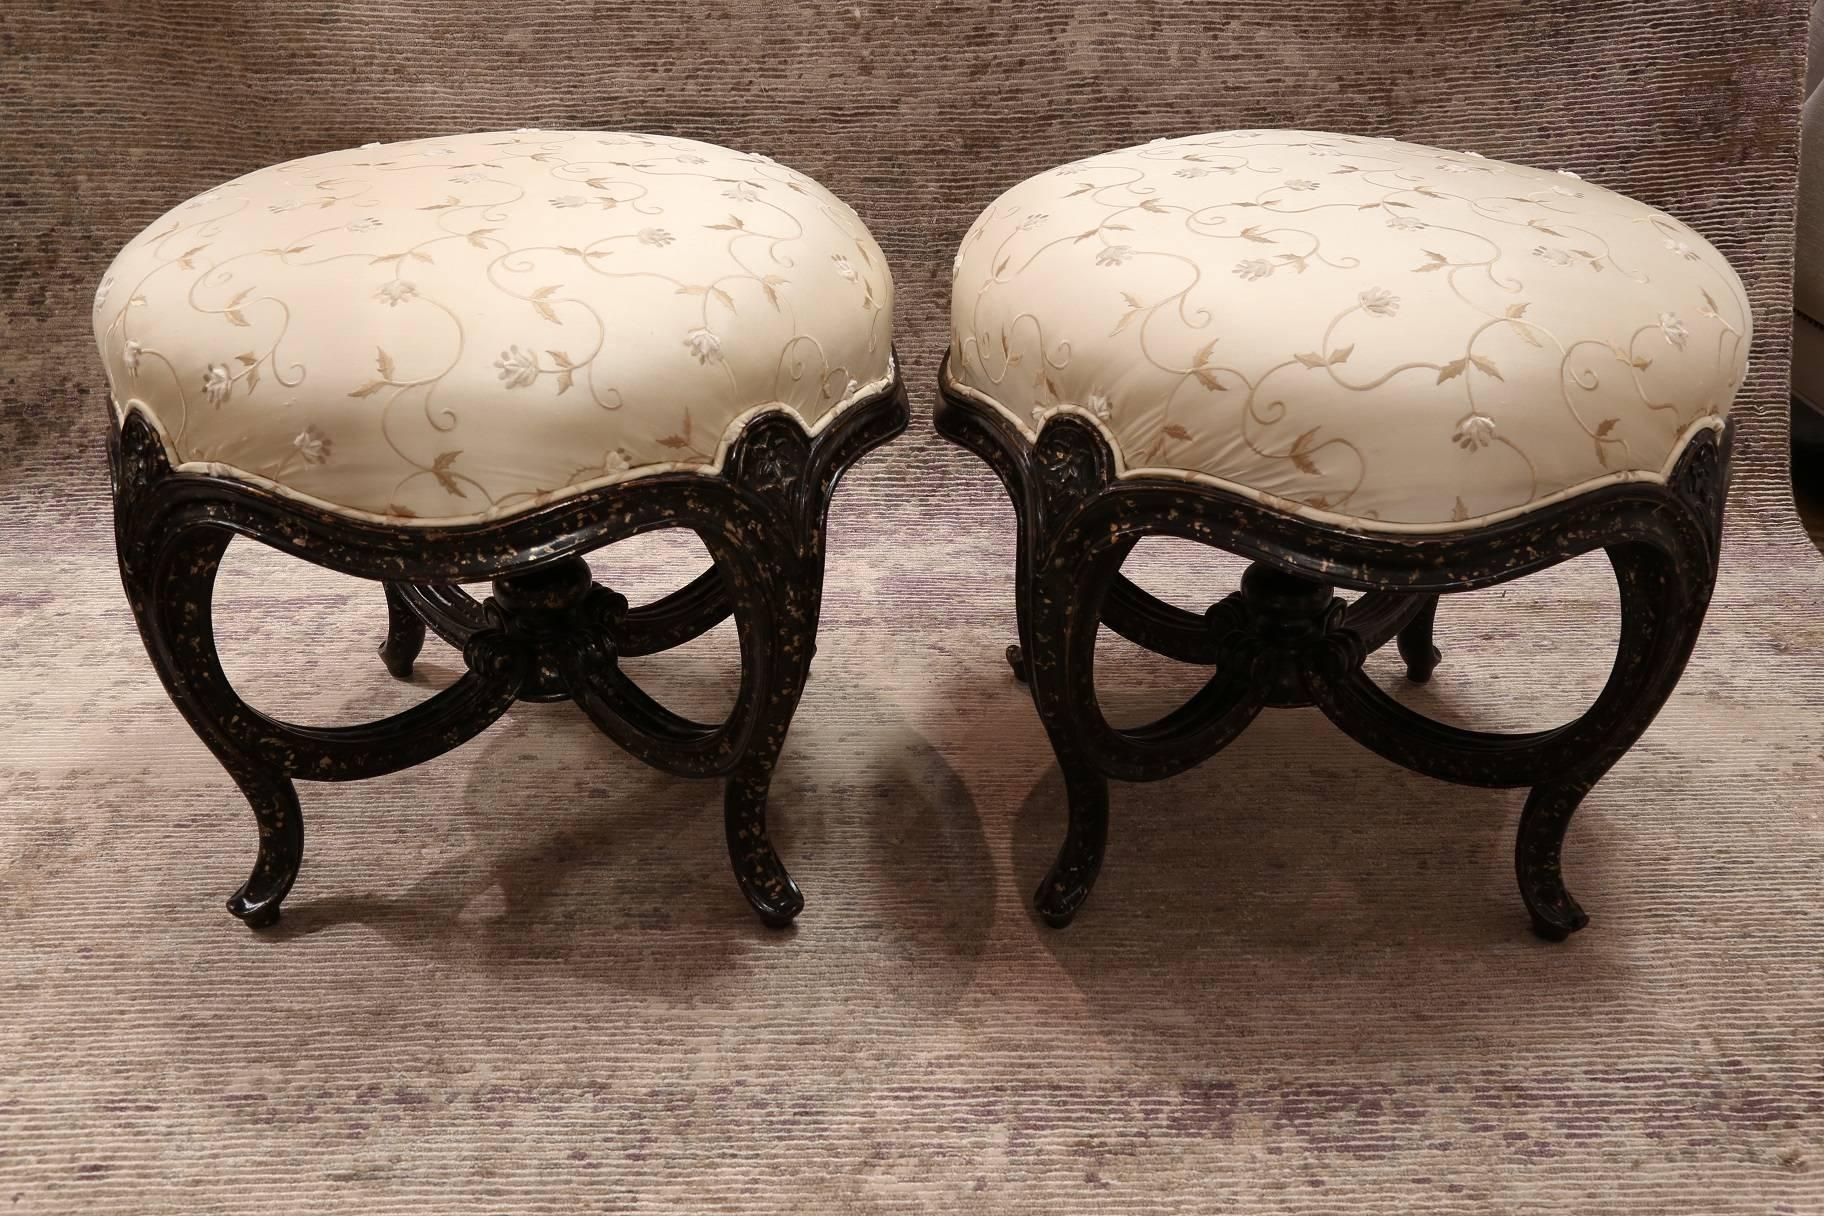 Pair of hand-carved round footstool with embroidered floral silk upholstery finished in a hand-painted distressed ebony featuring an elegant X-stretcher adorned with a finial, Italy.